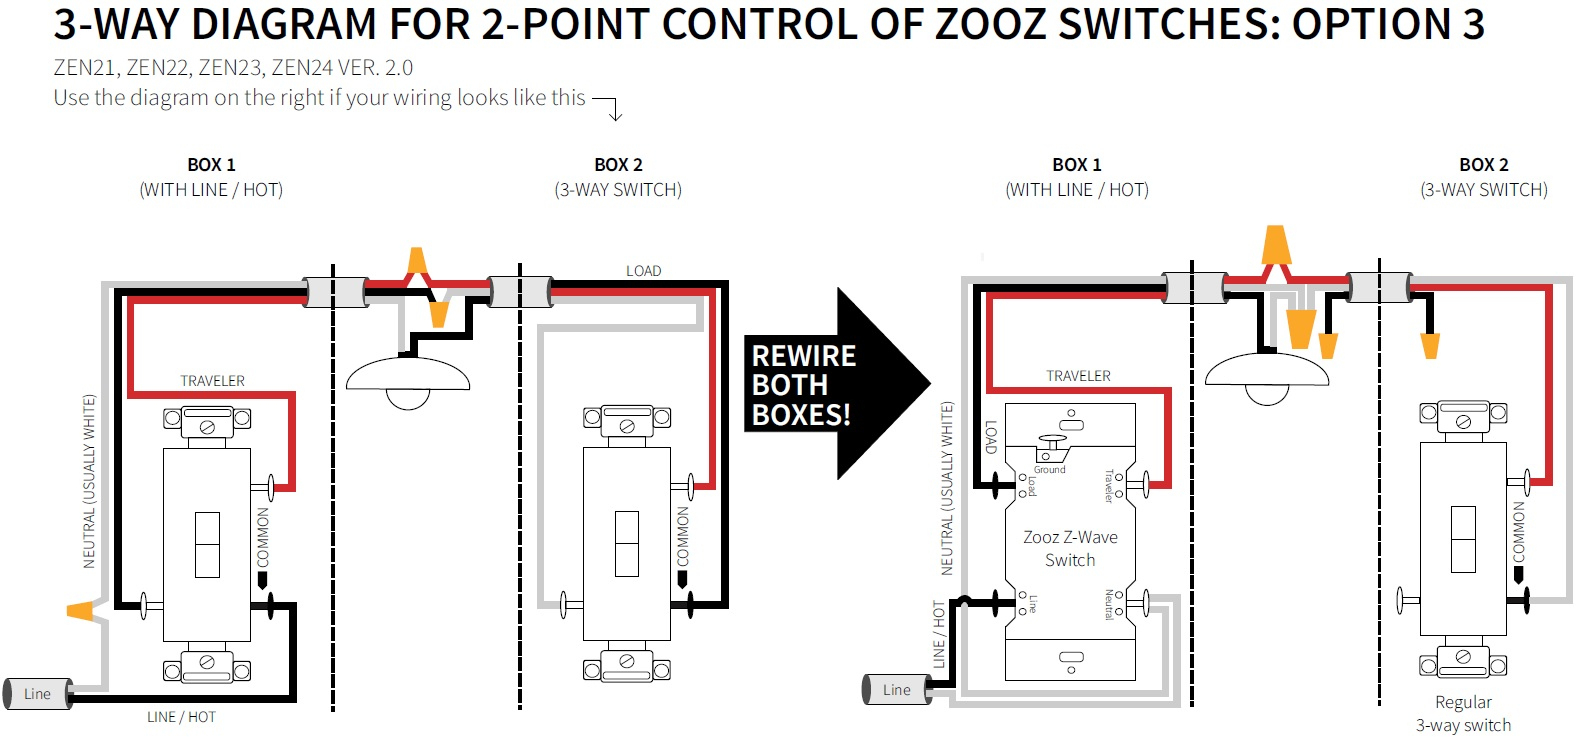 How To Wire Your Zooz Switch In A 3-Way Configuration - Zooz - 3Way Switch Wiring Diagram